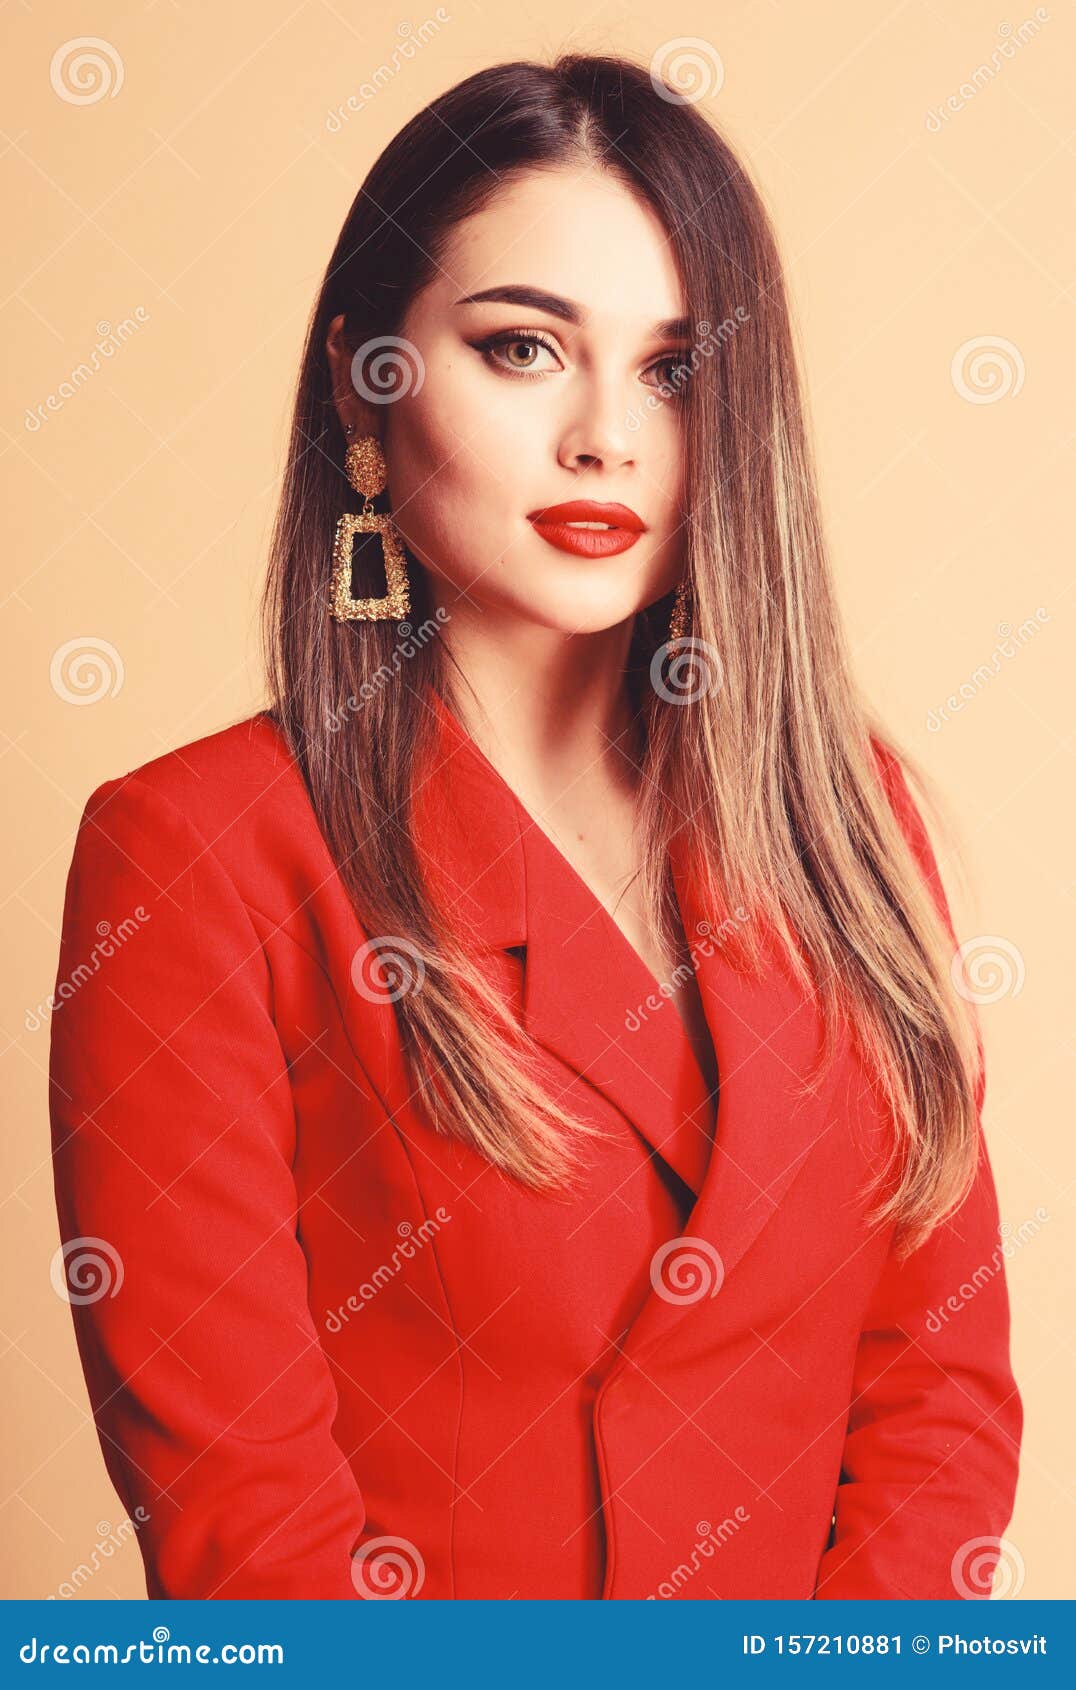 red lips my best accessory. girl confident business lady formal red jacket. gorgeous and stylish. impeccable makeup and